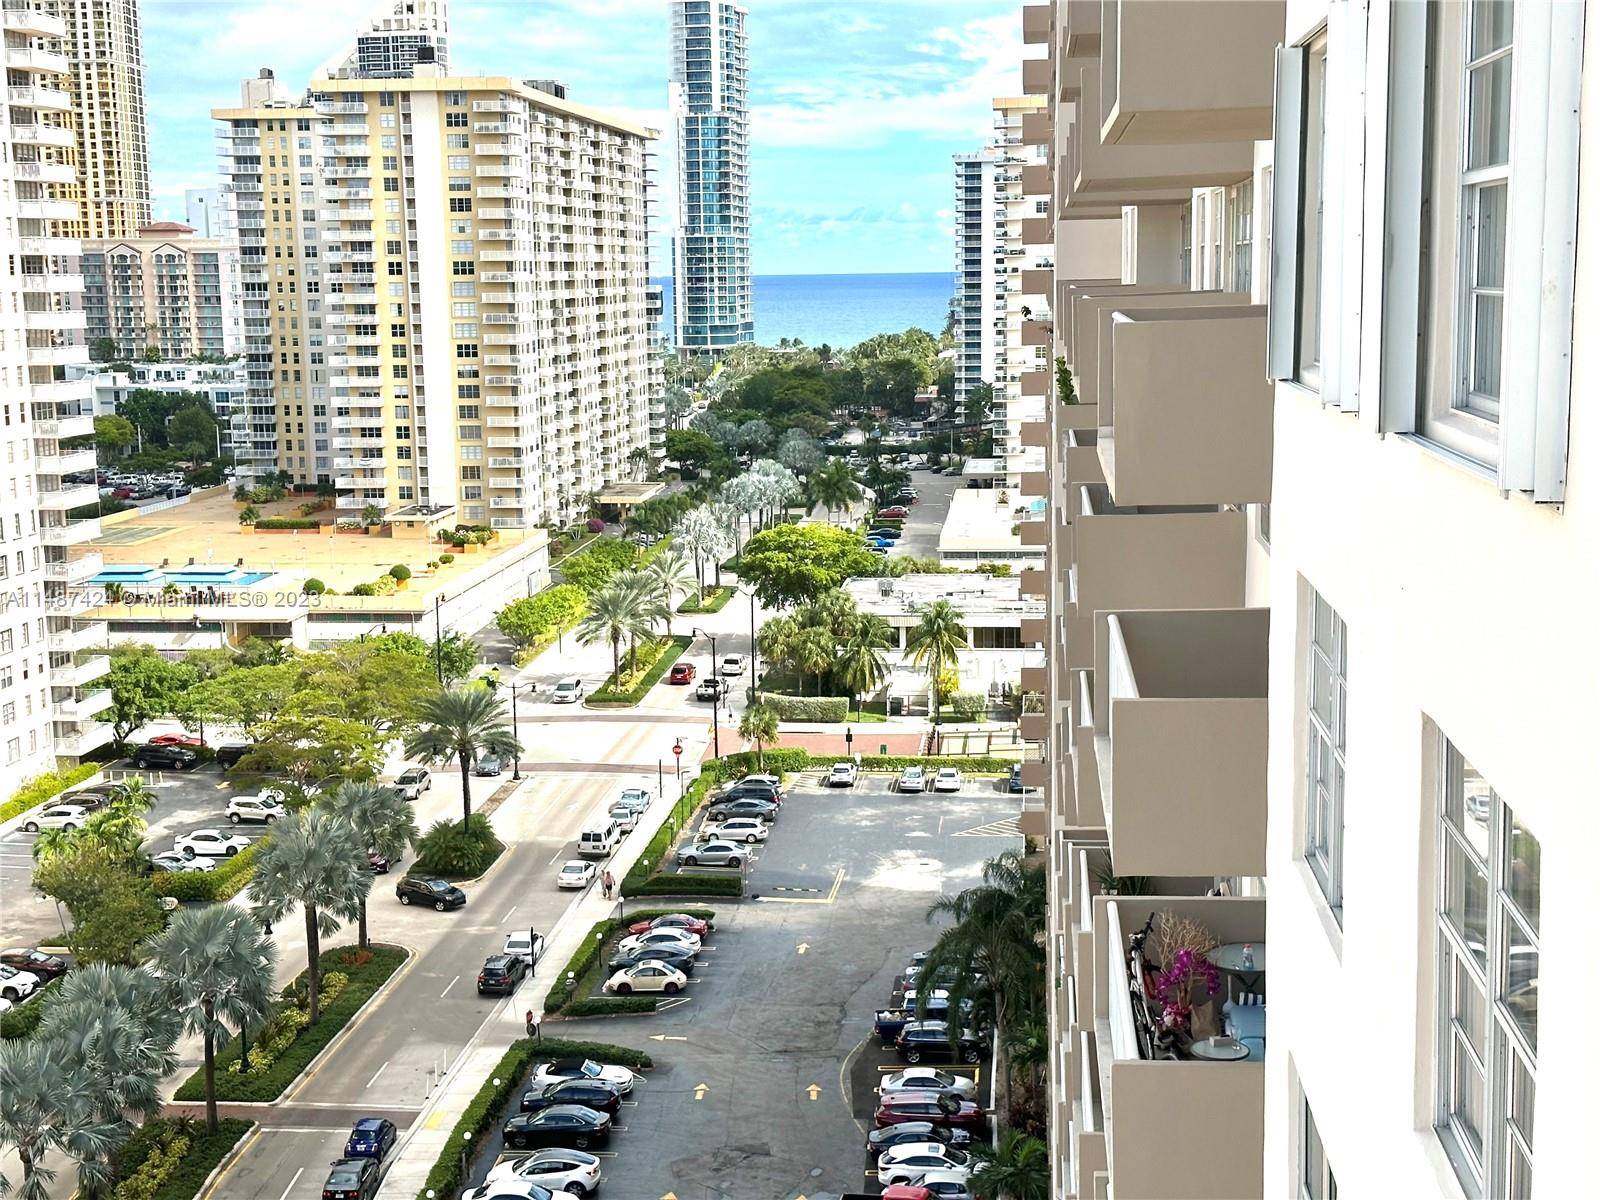 Welcome to 2 bedrooms Corner unit converted to 3 bedrooms 2 bathrooms with total of 1824 sq ft, located in the heart of Sunny Isles Beach.